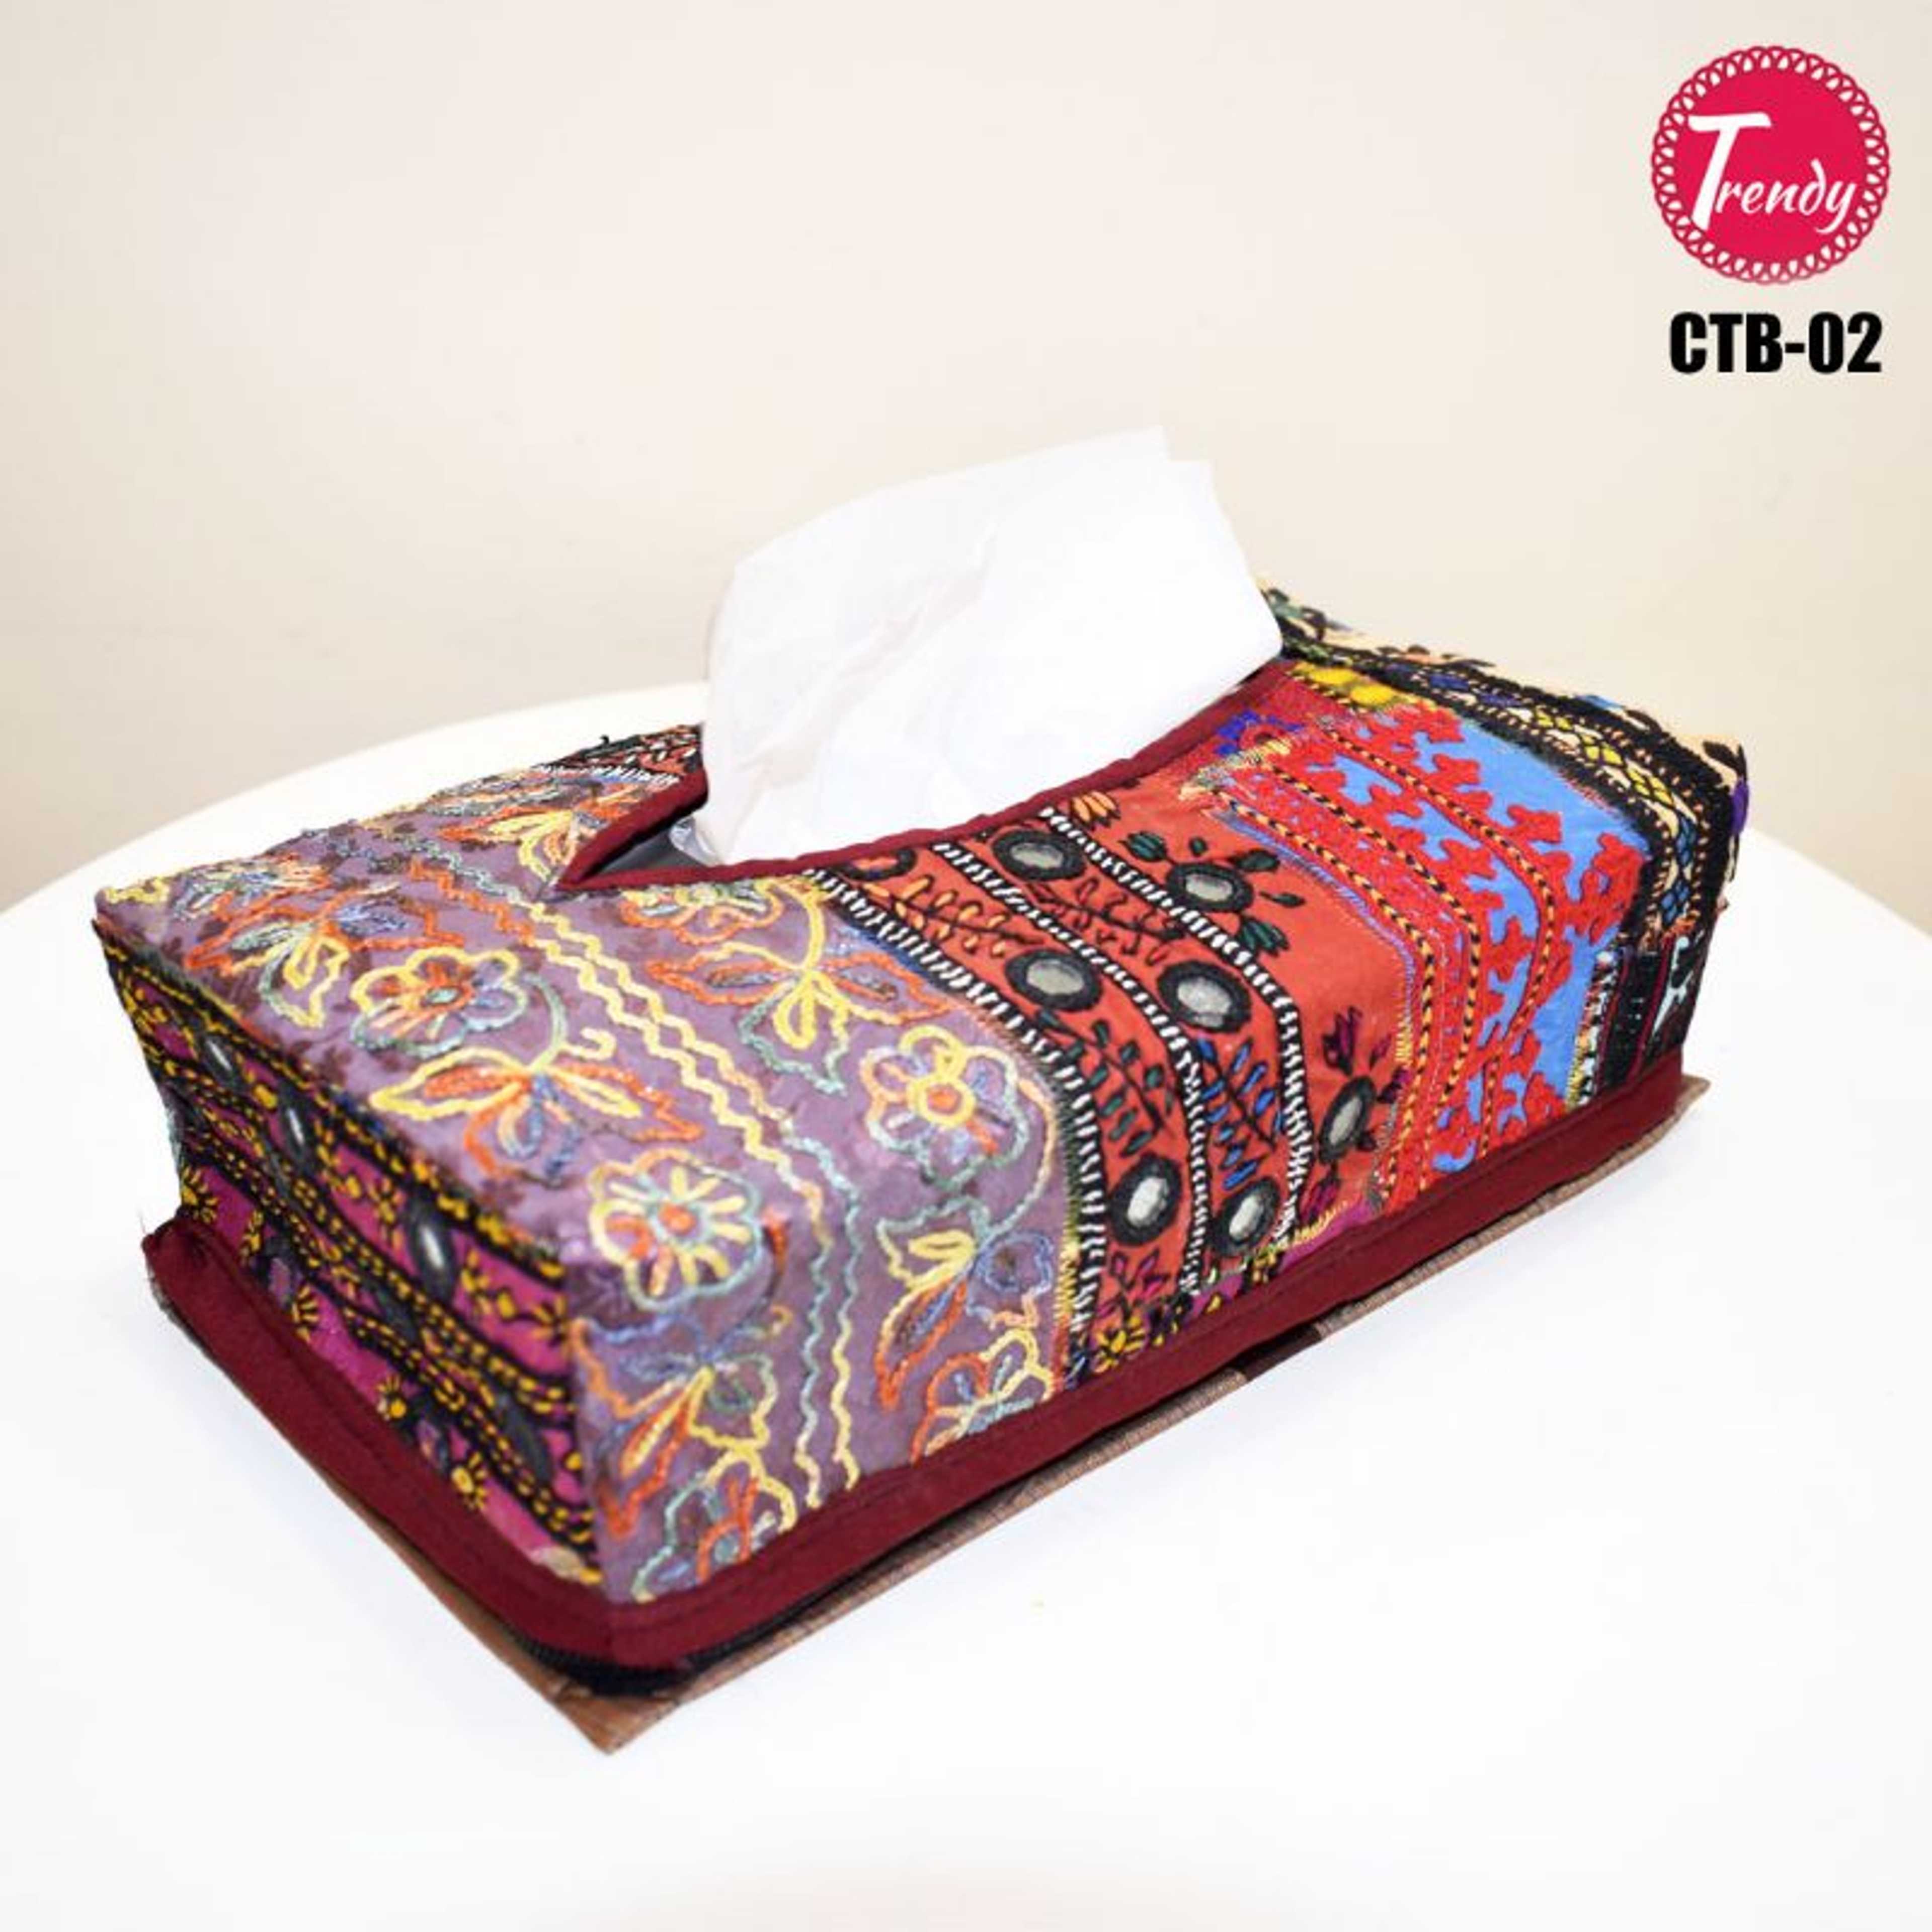 Sindhi Hand Embroidery Fabric Tissue Box Cover CTB-02